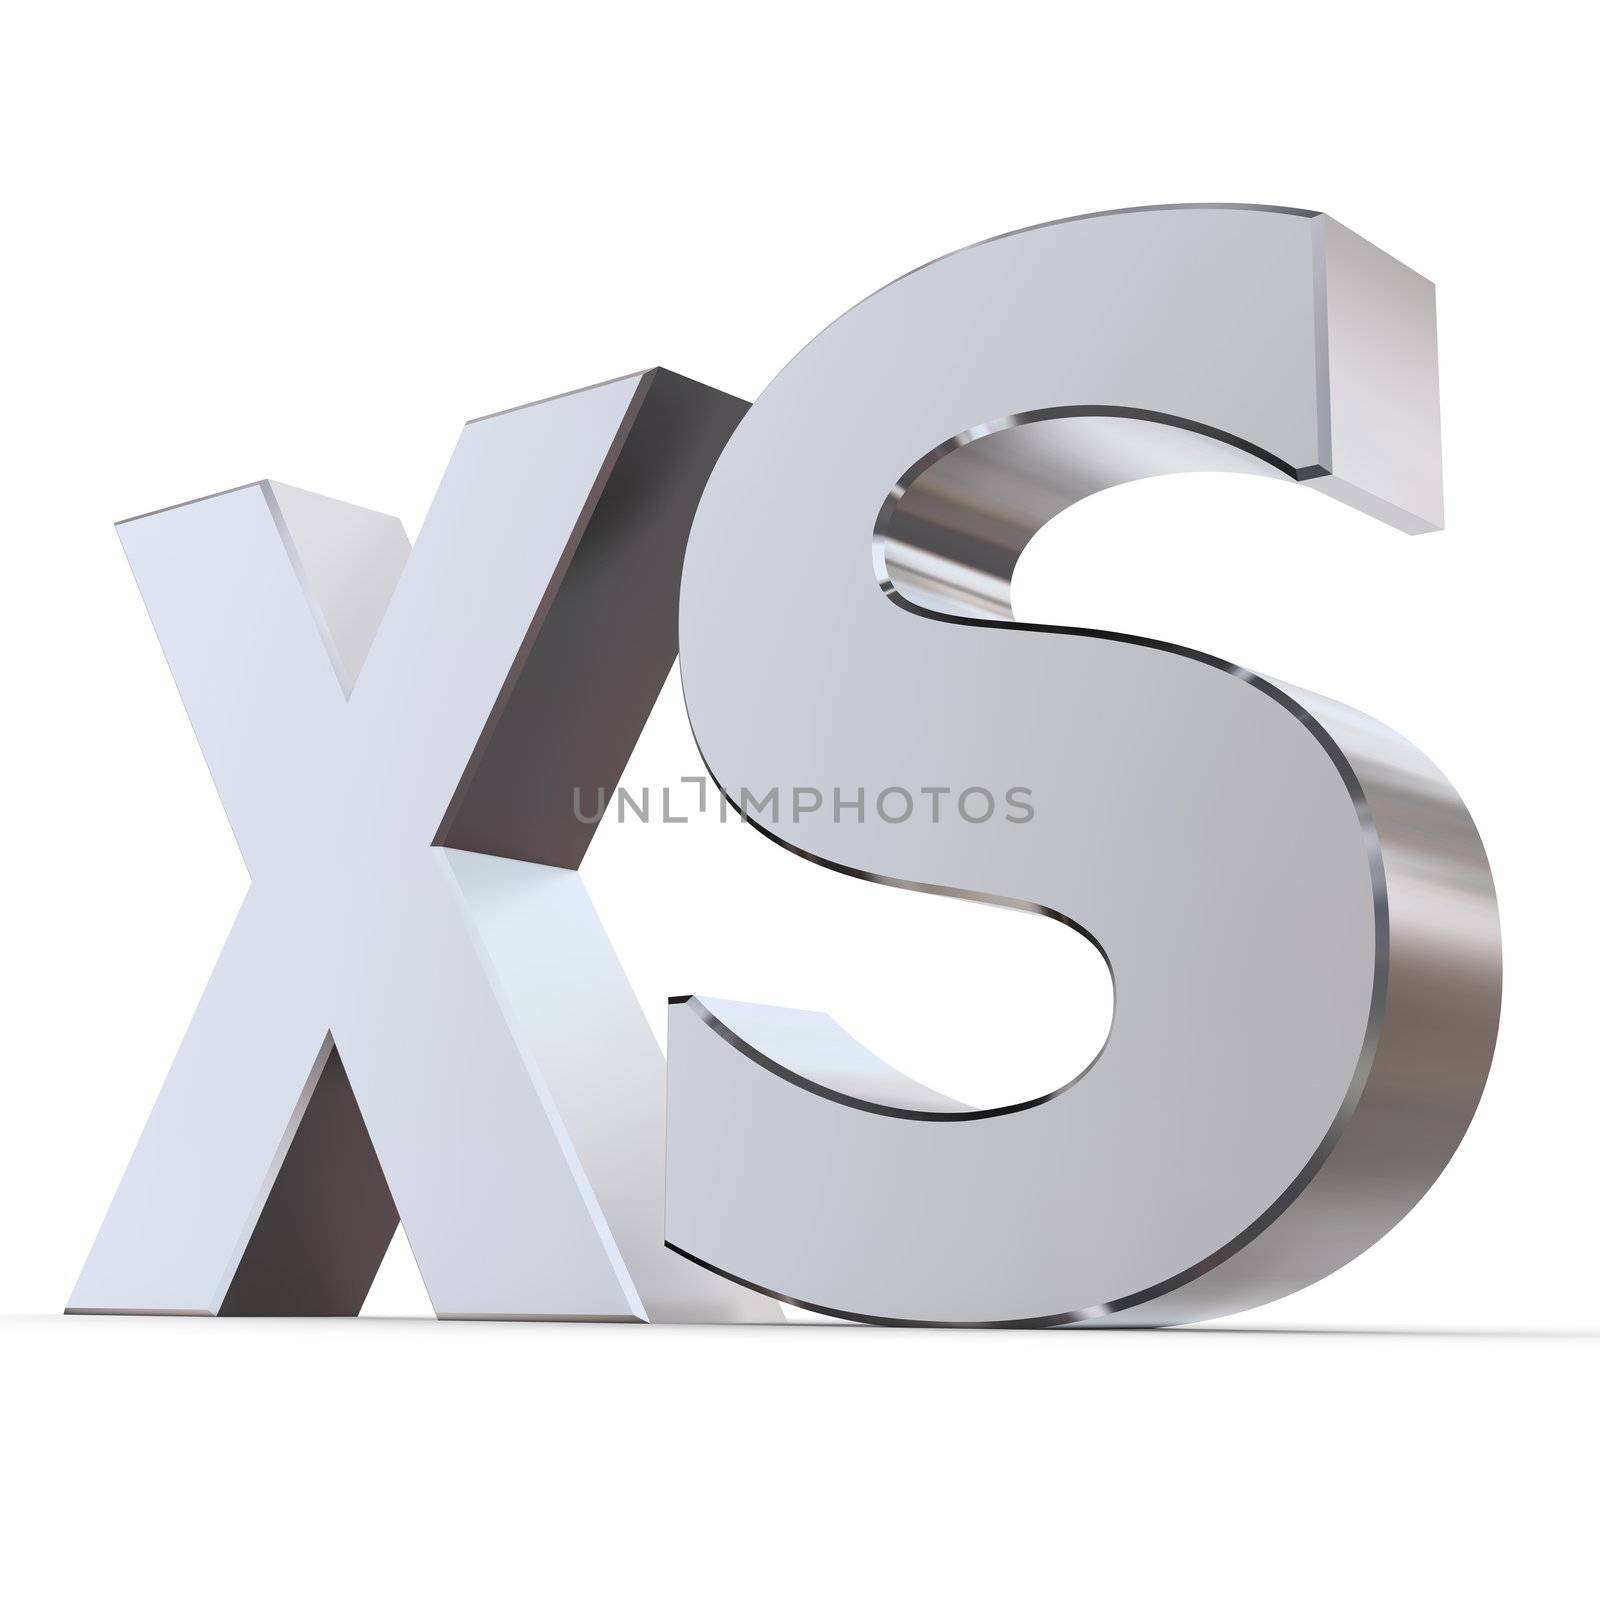 shiny 3d letters XS made of silver/chrome